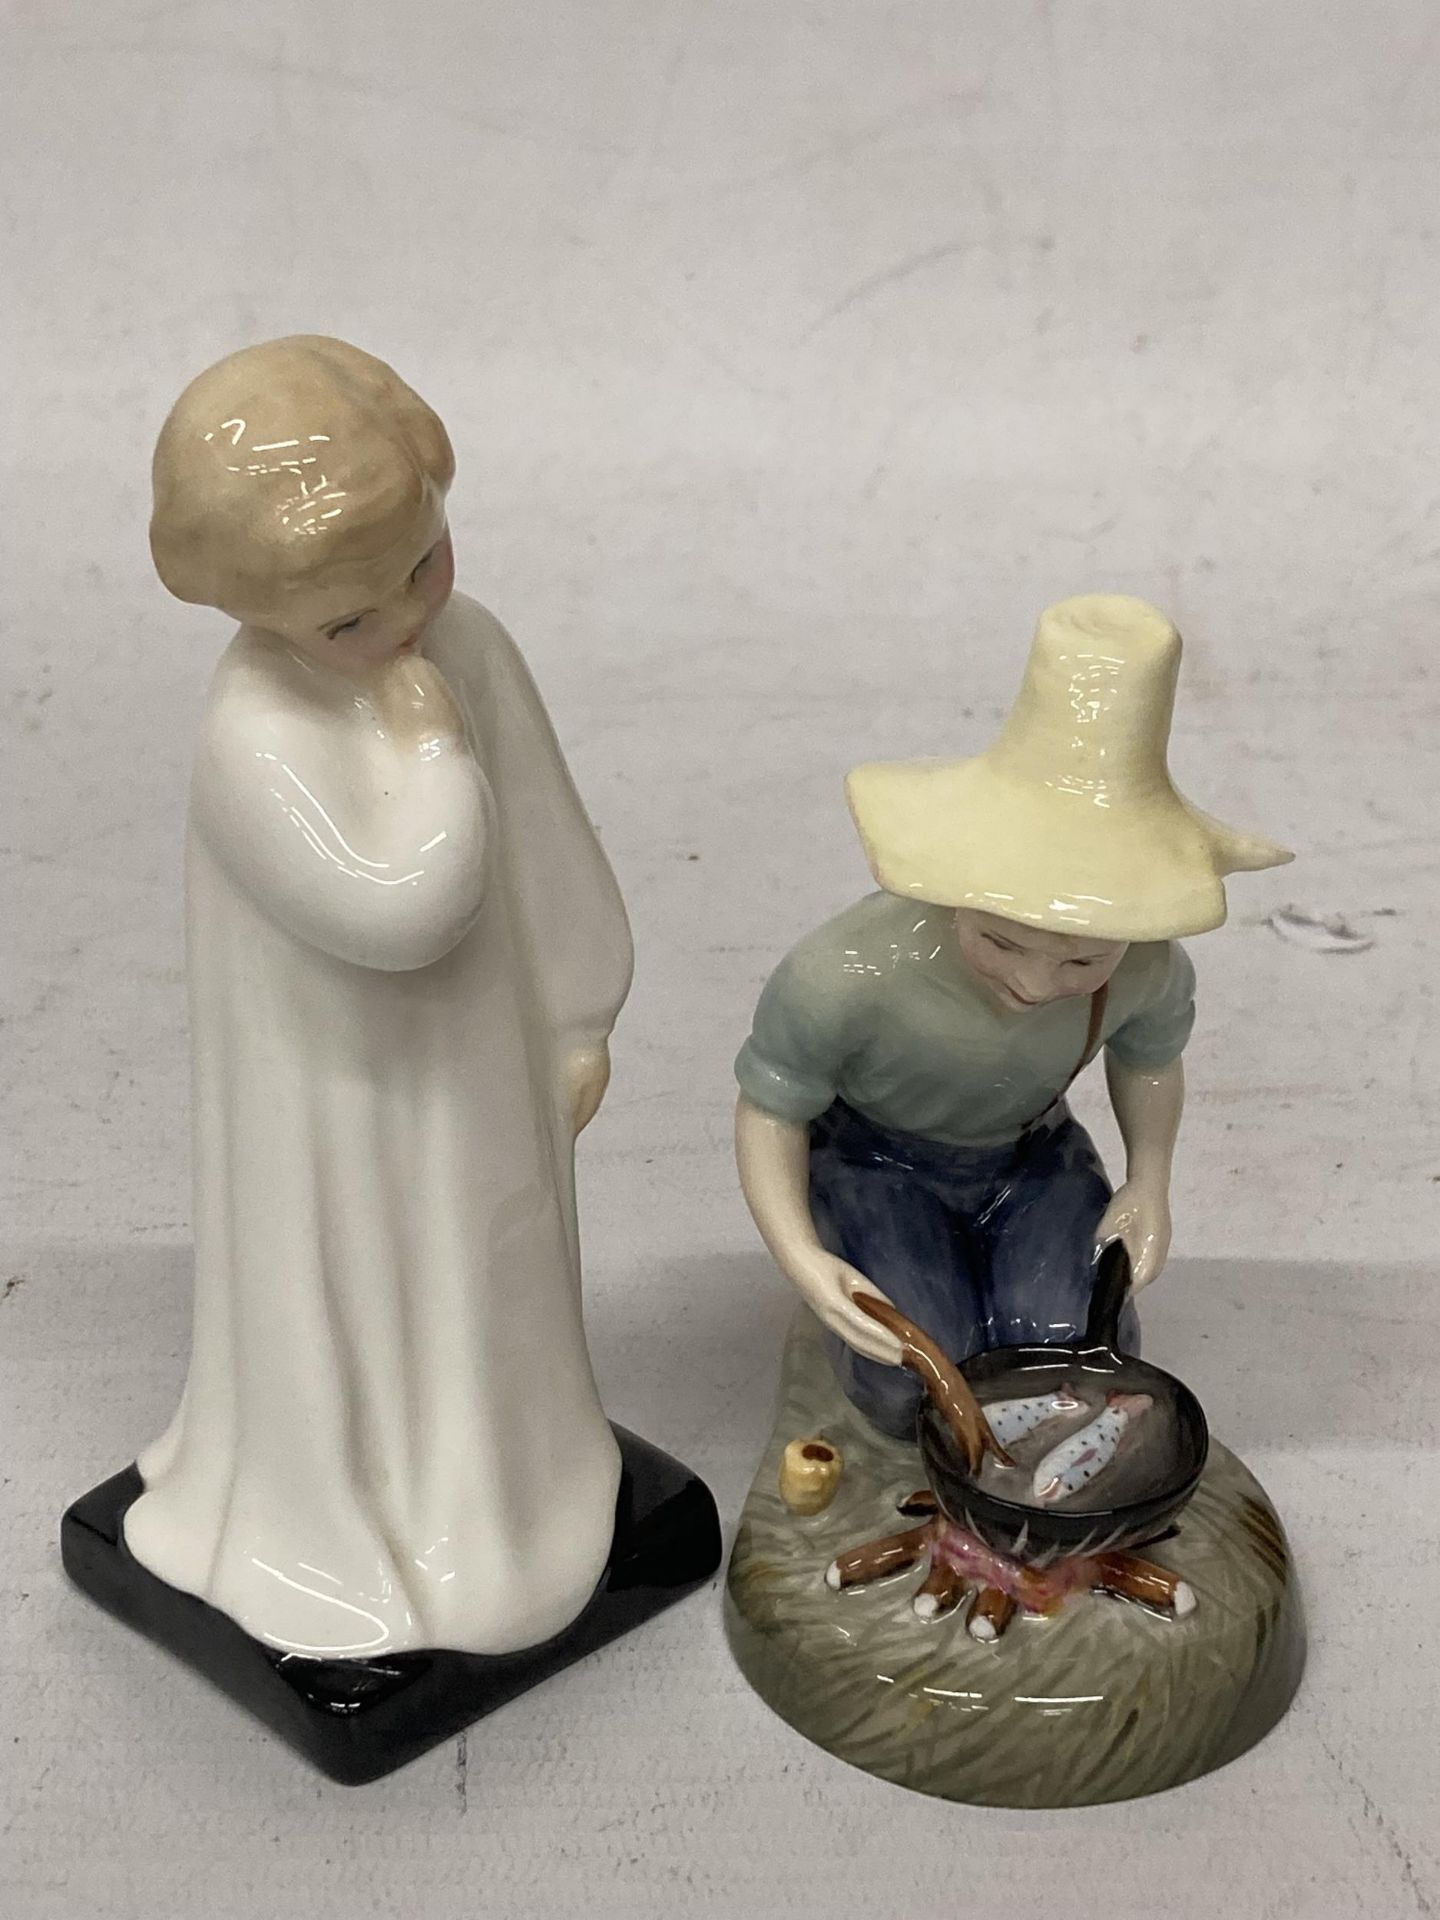 TWO ROYAL DOULTON FIGURES "RIVER BOY" HN 2128 AND"DARLING" HN 1985 - Image 2 of 4